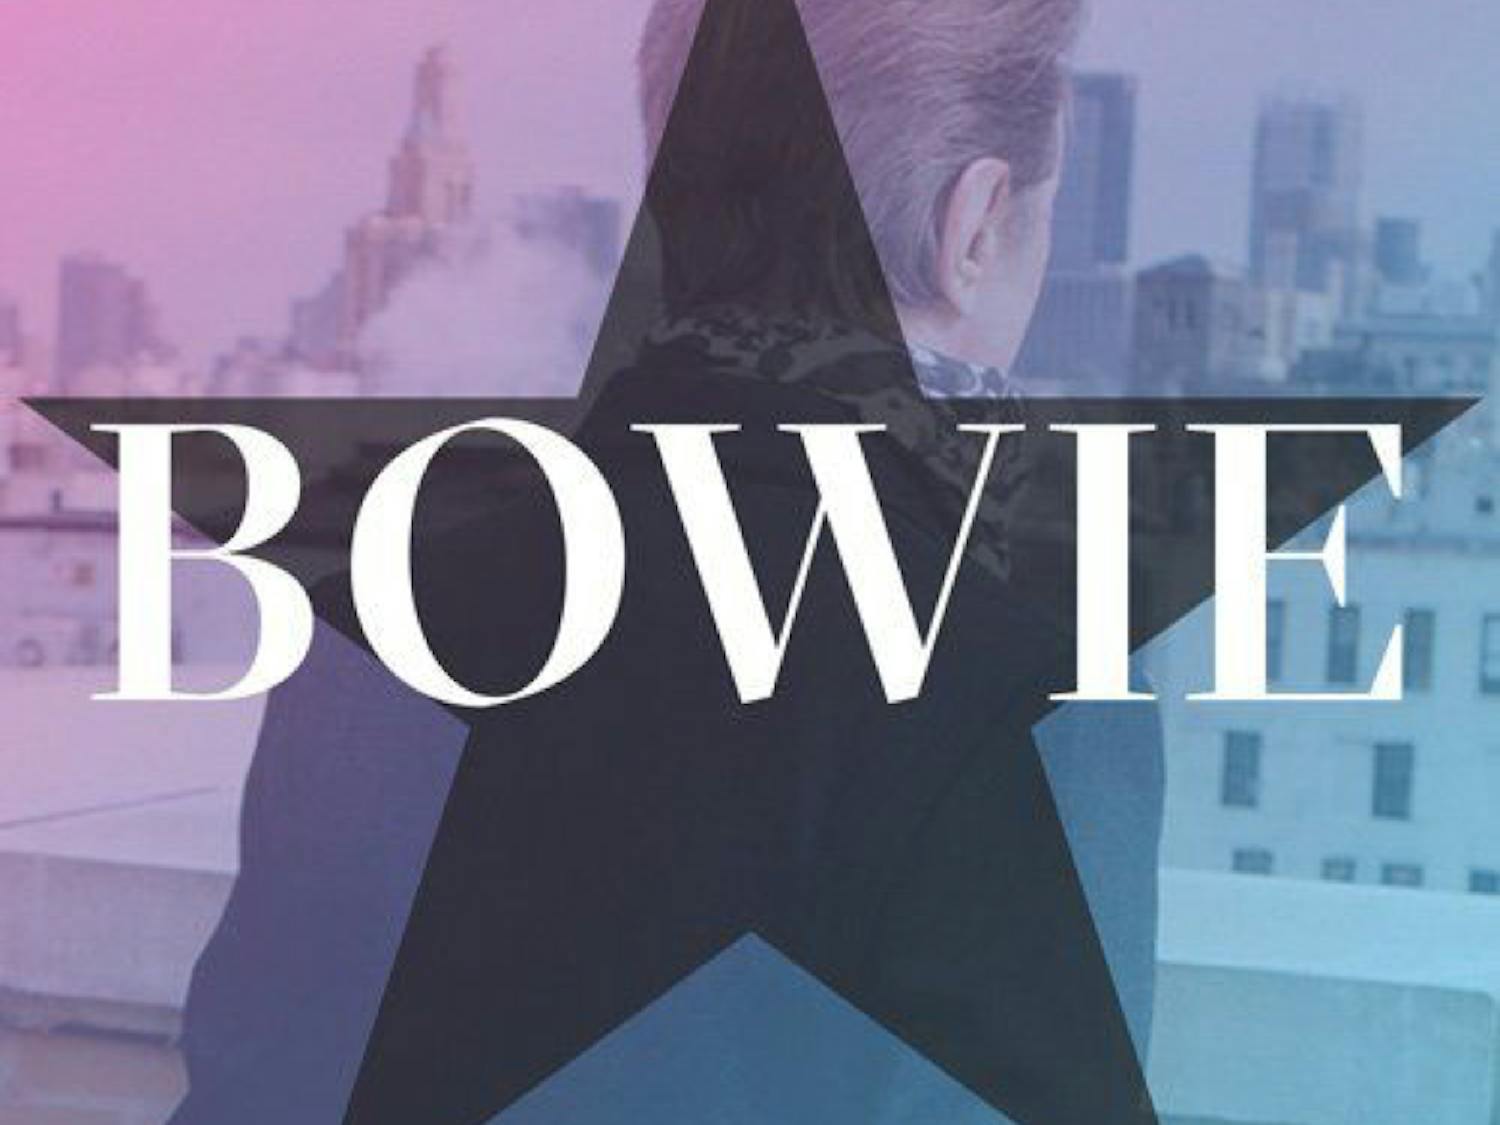 Bowies